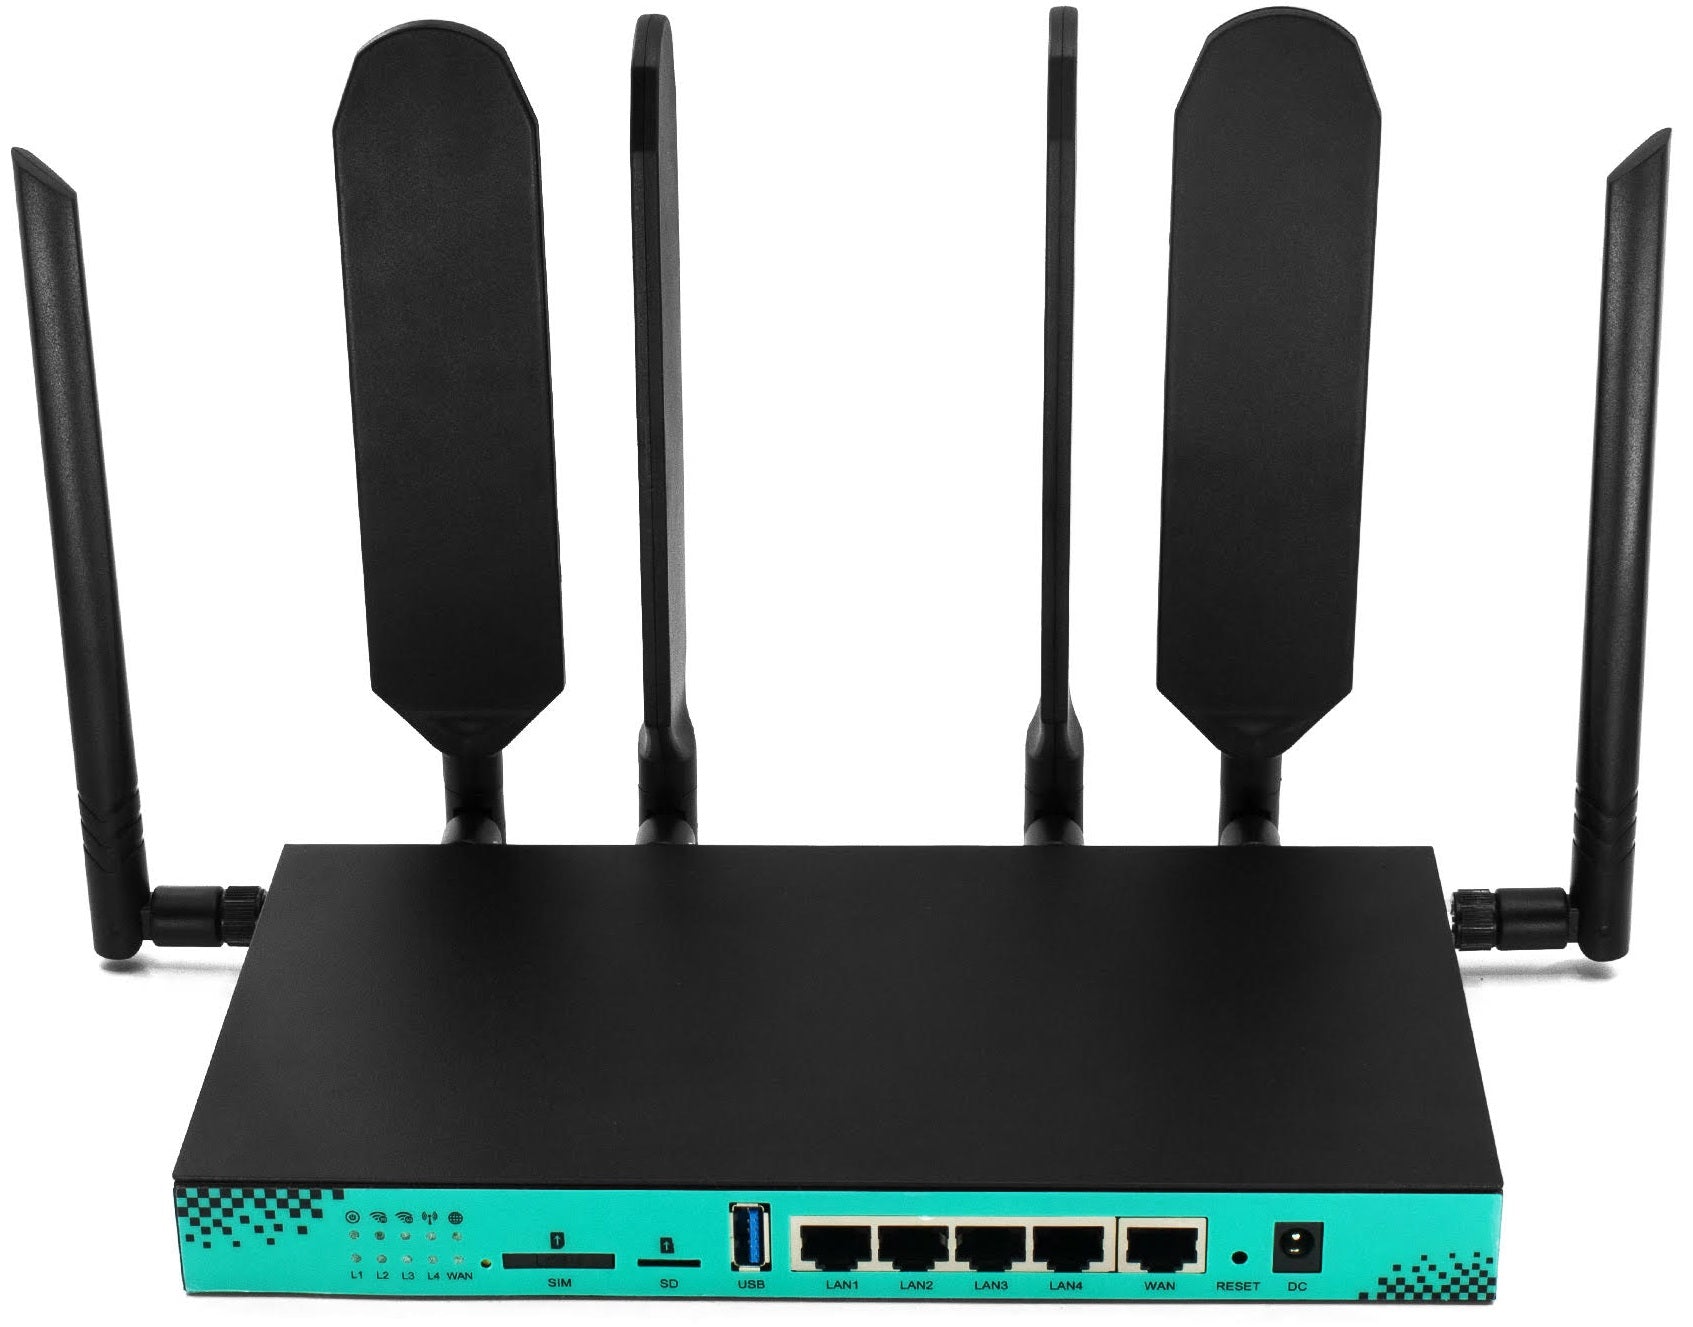 Possibly the BEST 5G Sim LTE Router I Have EVER Used - The